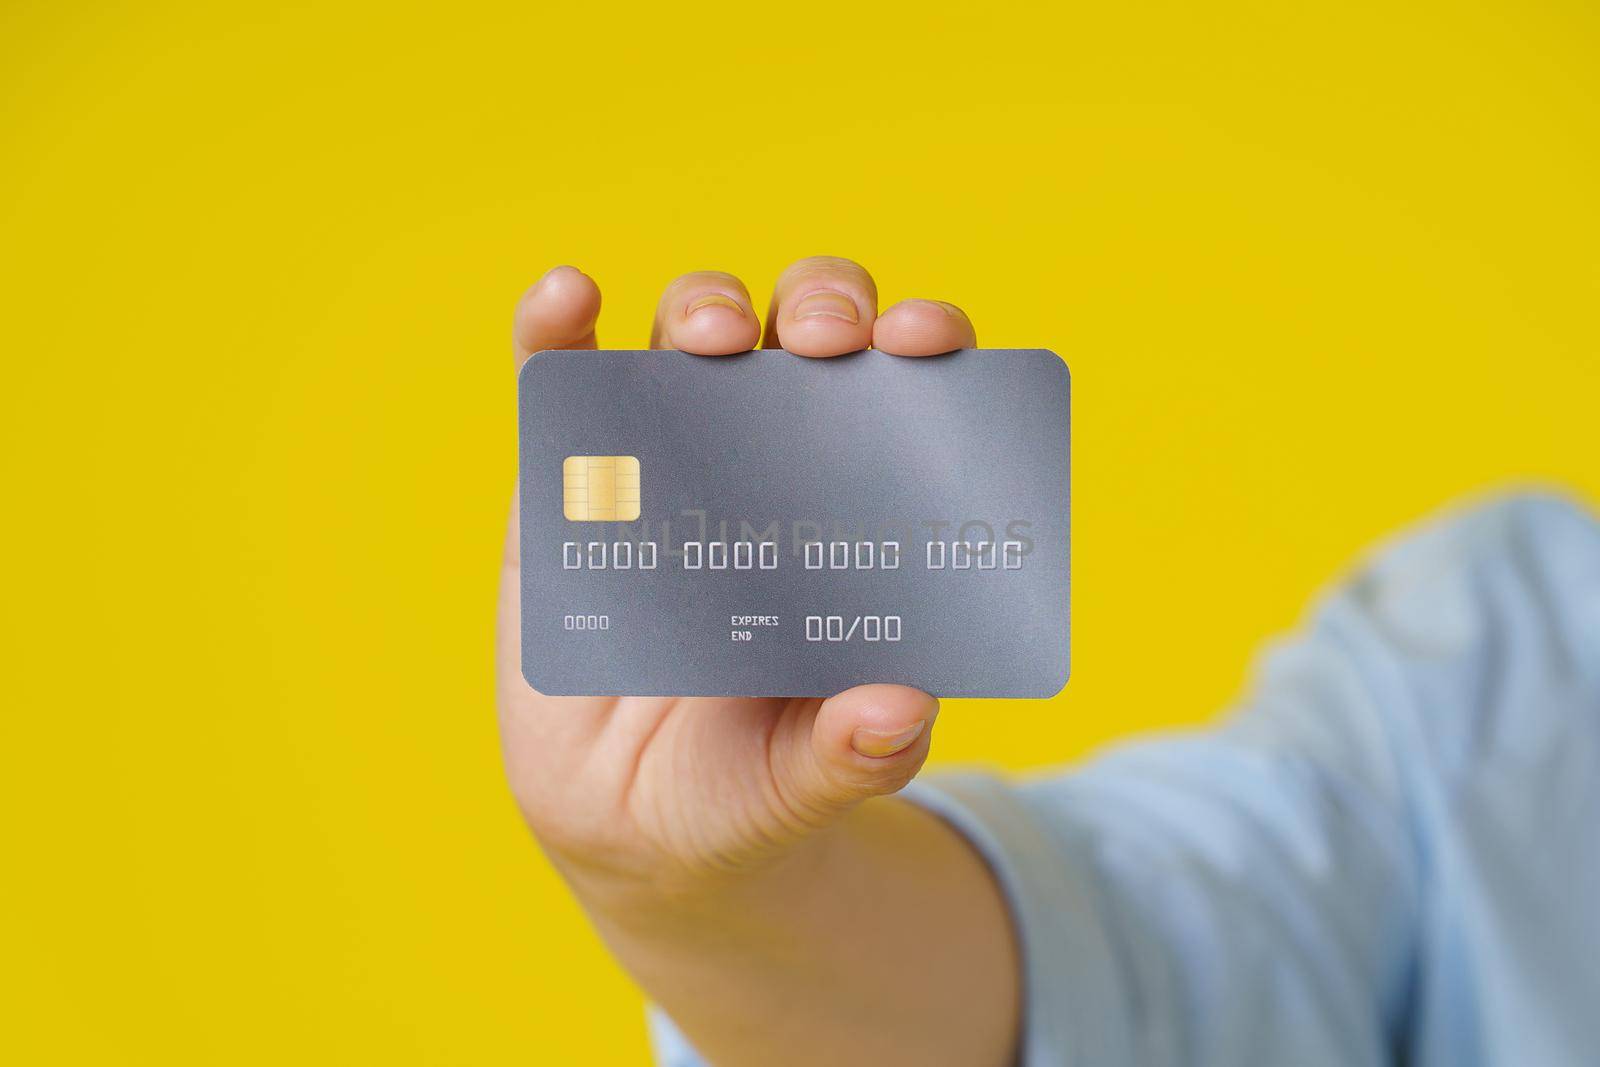 Credit, debit cad close up in hand of mature woman showing it on camera, customer online payment or shopping online, isolated on yellow background. E-commerce, online banking concept.